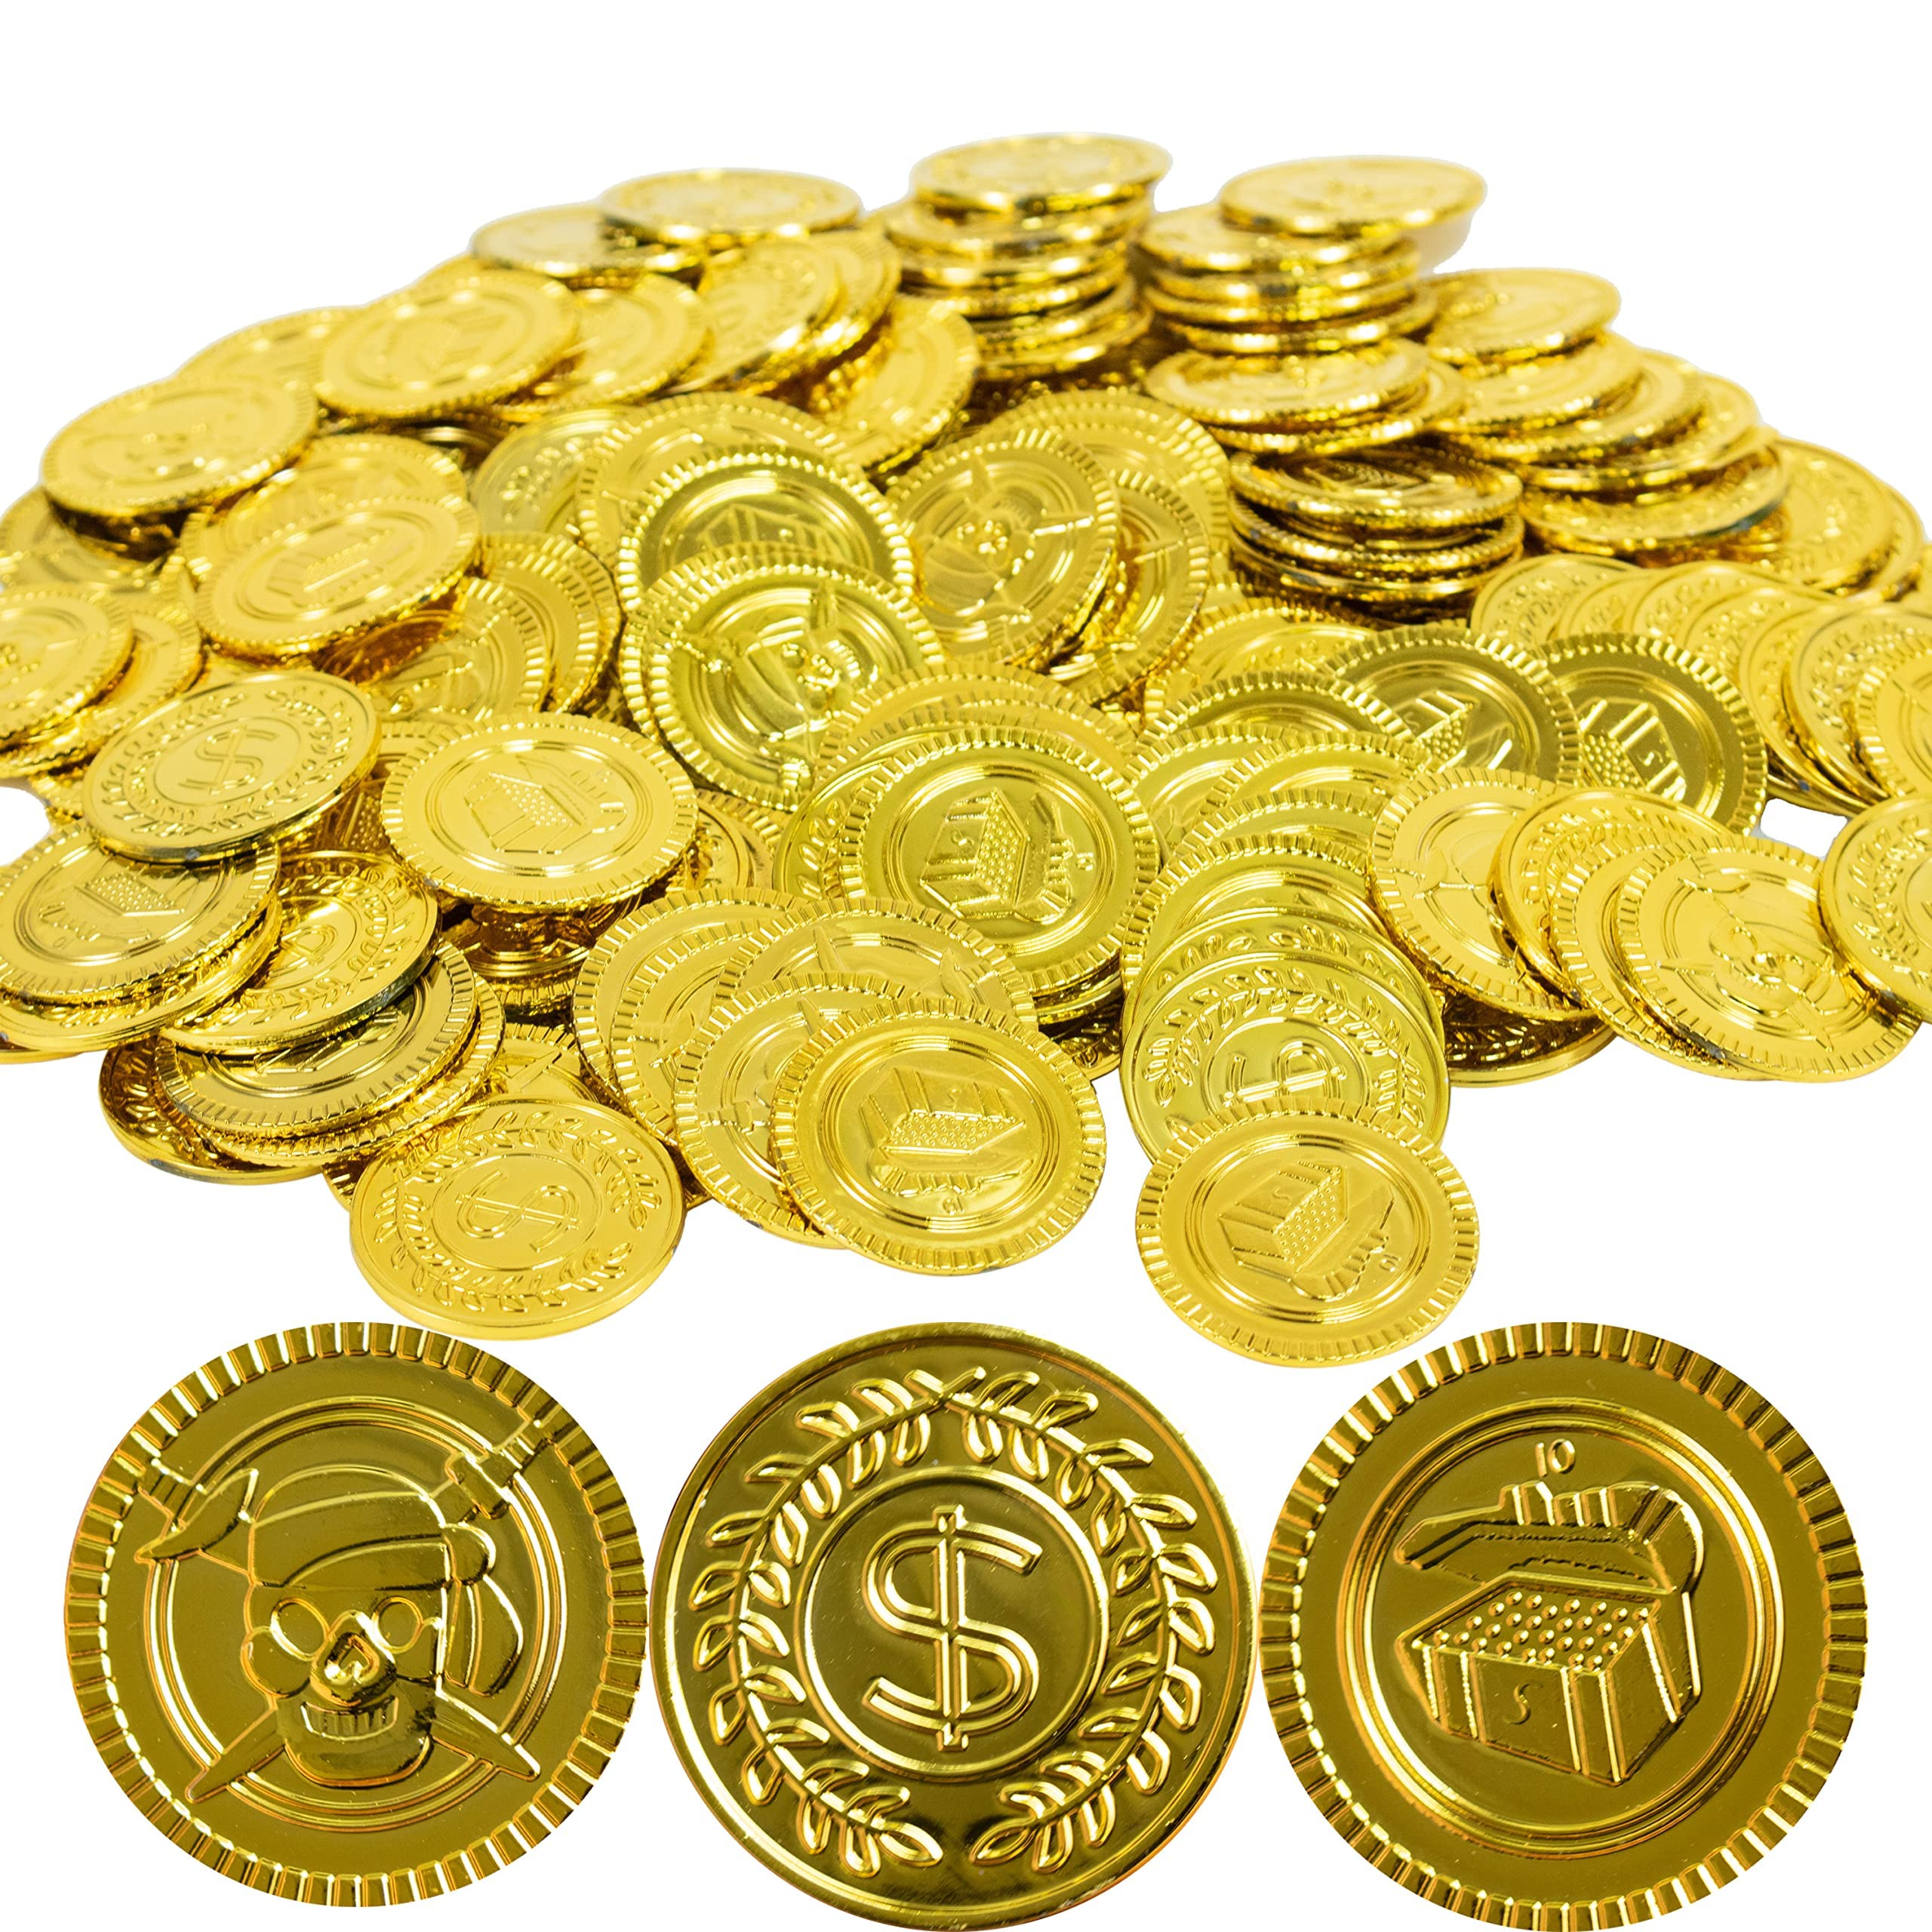 GiftExpress 144PC Plastic Gold Coins Pirate Coins Kids Pretend Play Coins Treasure Coins for Pirate Party, Gold Coins for Treasure Hunt Game and Party Favors